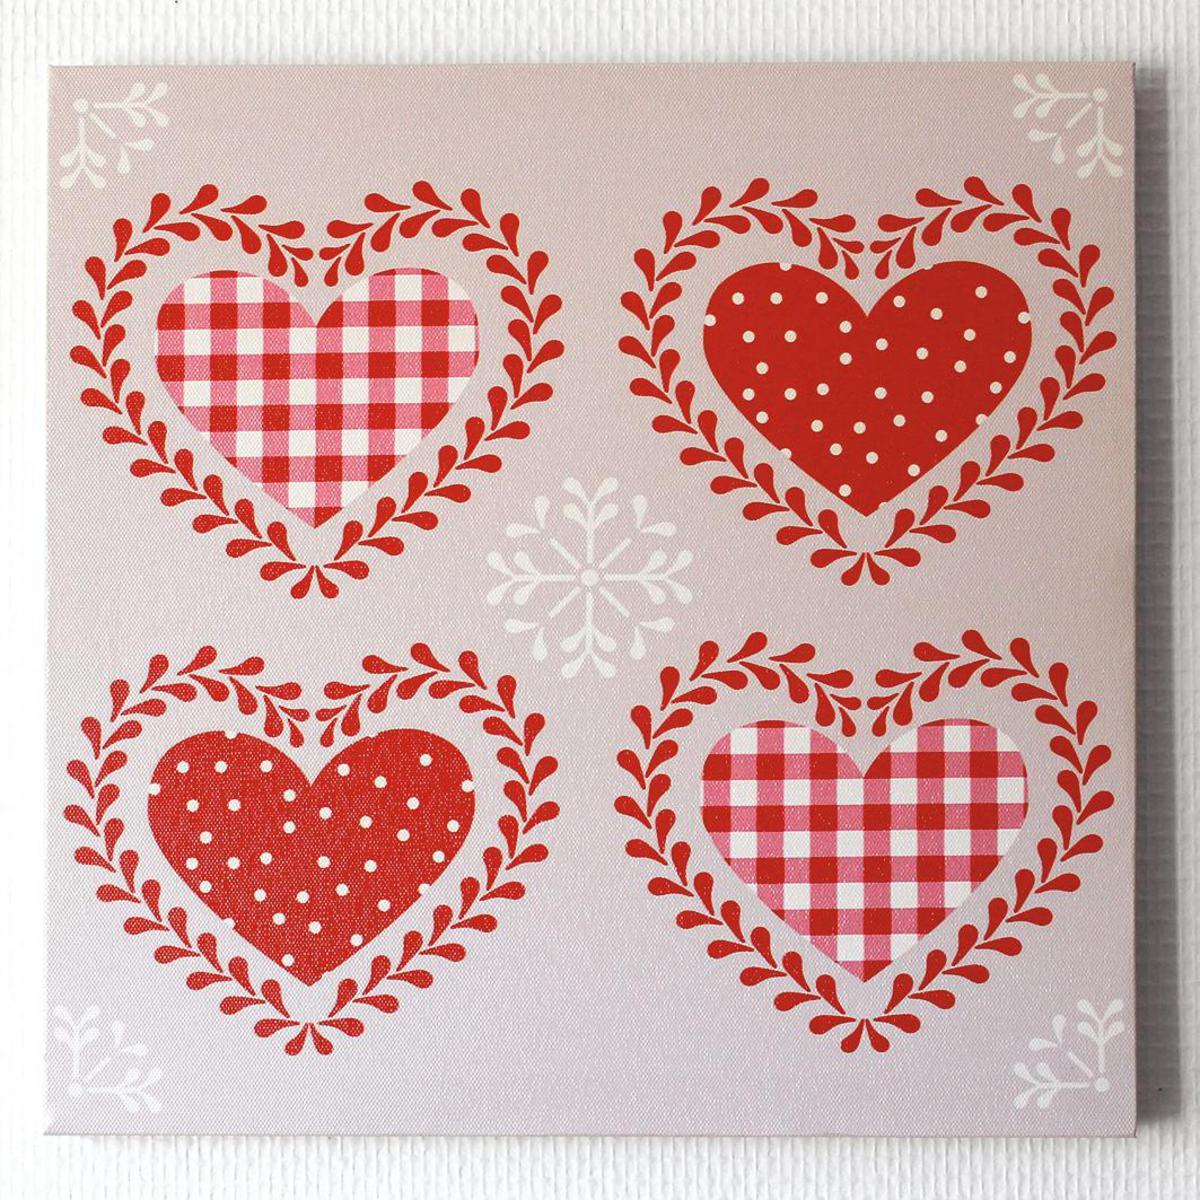 Tableau toile - Polyester - 30 x 30 cm - Rouge